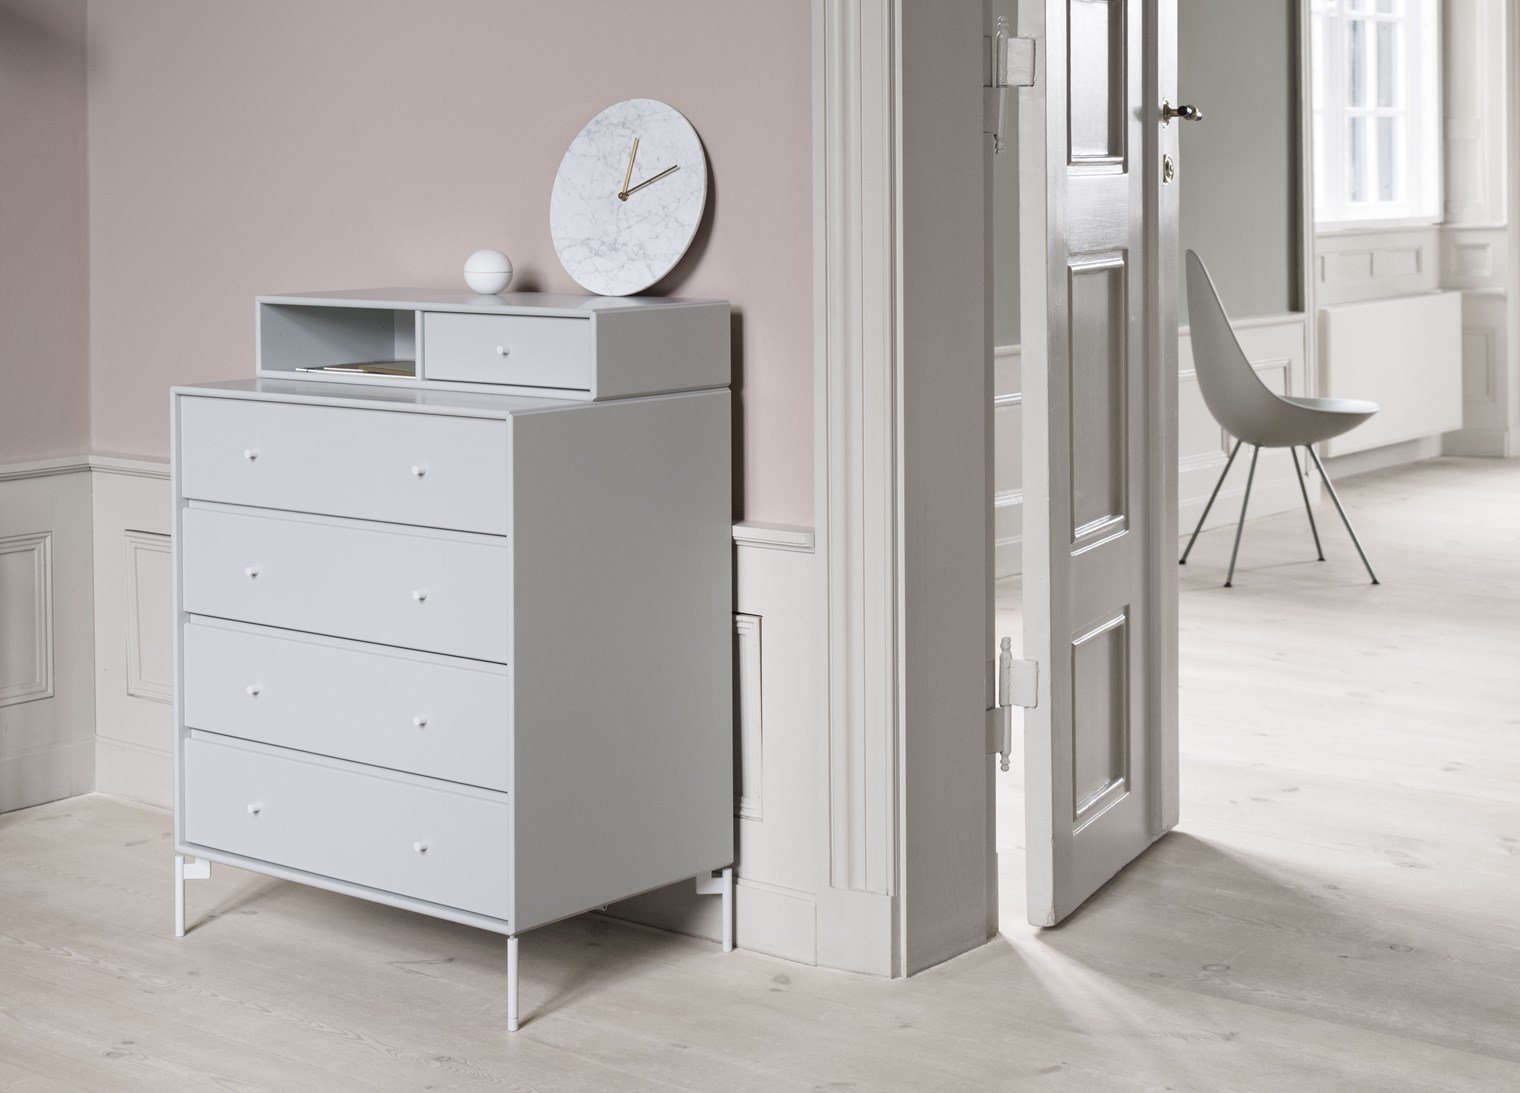 Montana Keep Bre of Drawers med 3 cm piedestal, Nordic White